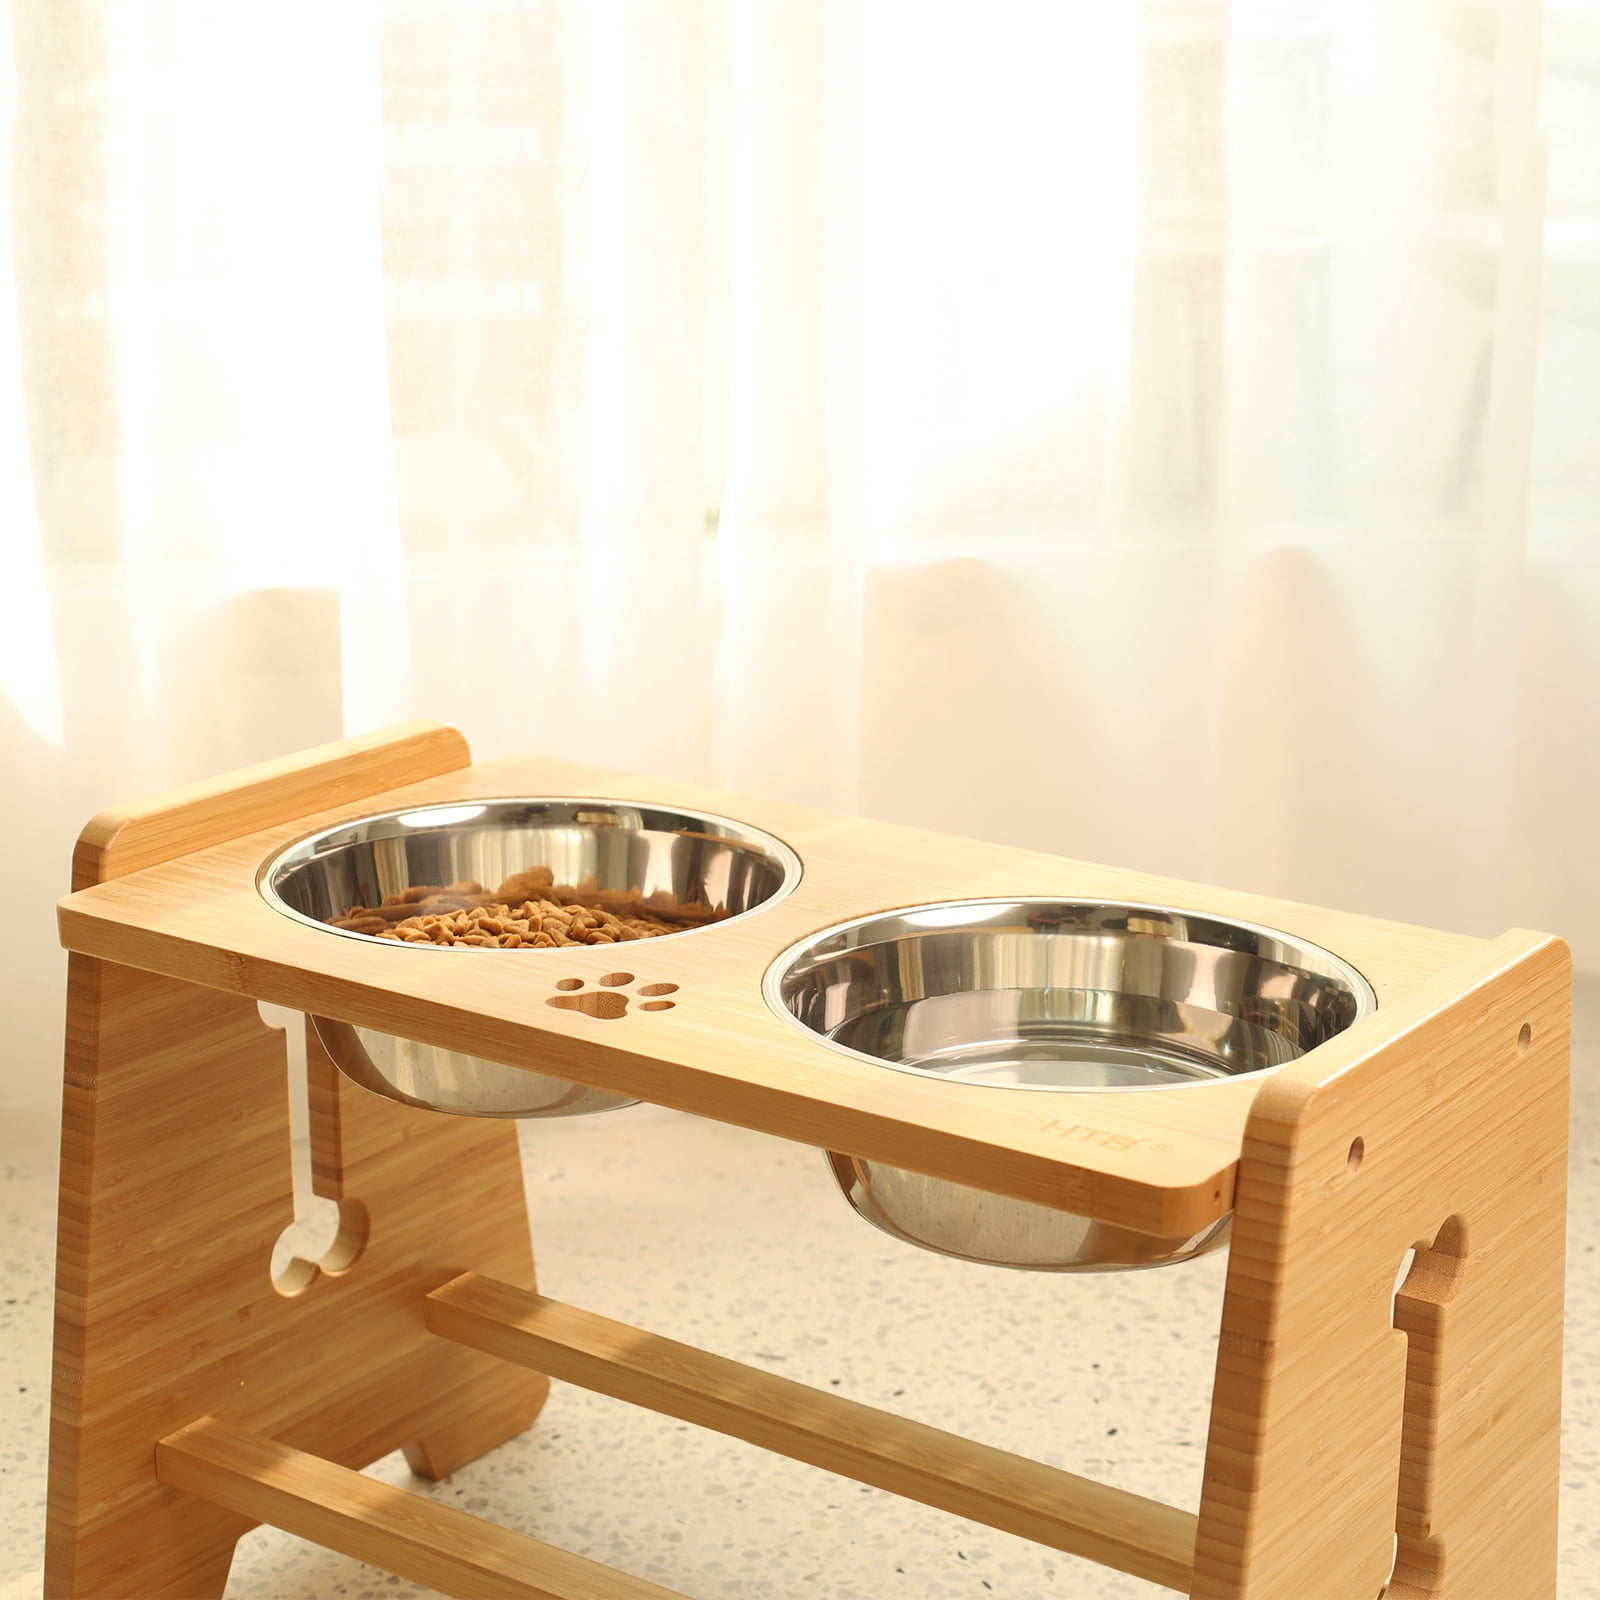 HTB Elevated Dog Bowls,Adjustable from 11.2”To 16” for Medium